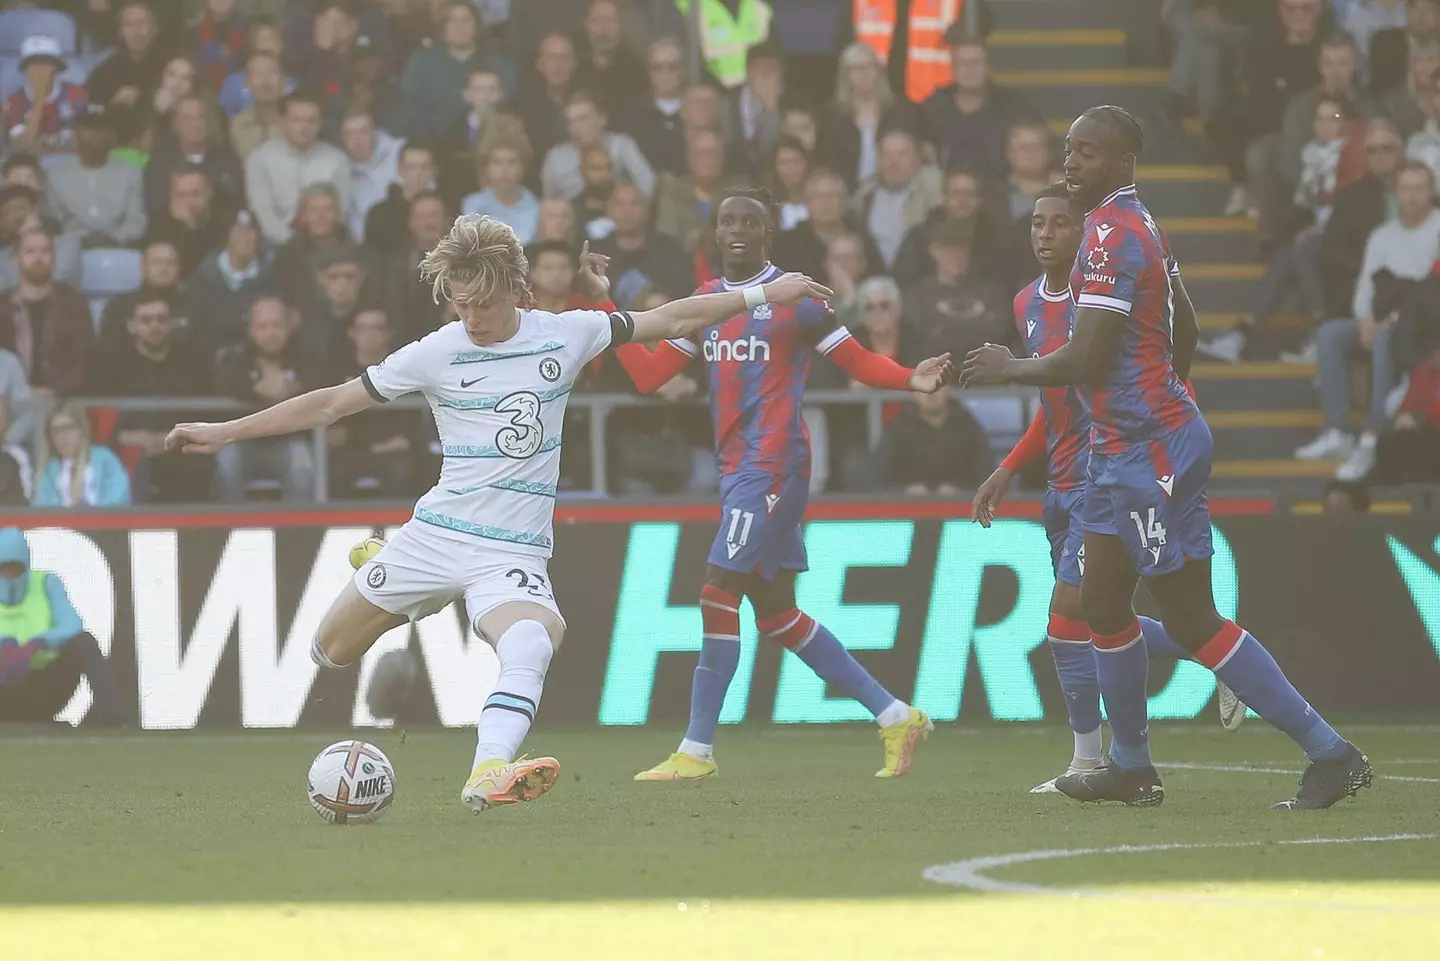 Conor Gallagher scores in the 90th minute to make the score 1-2 during the Premier League match between Crystal Palace and Chelsea. (Alamy)